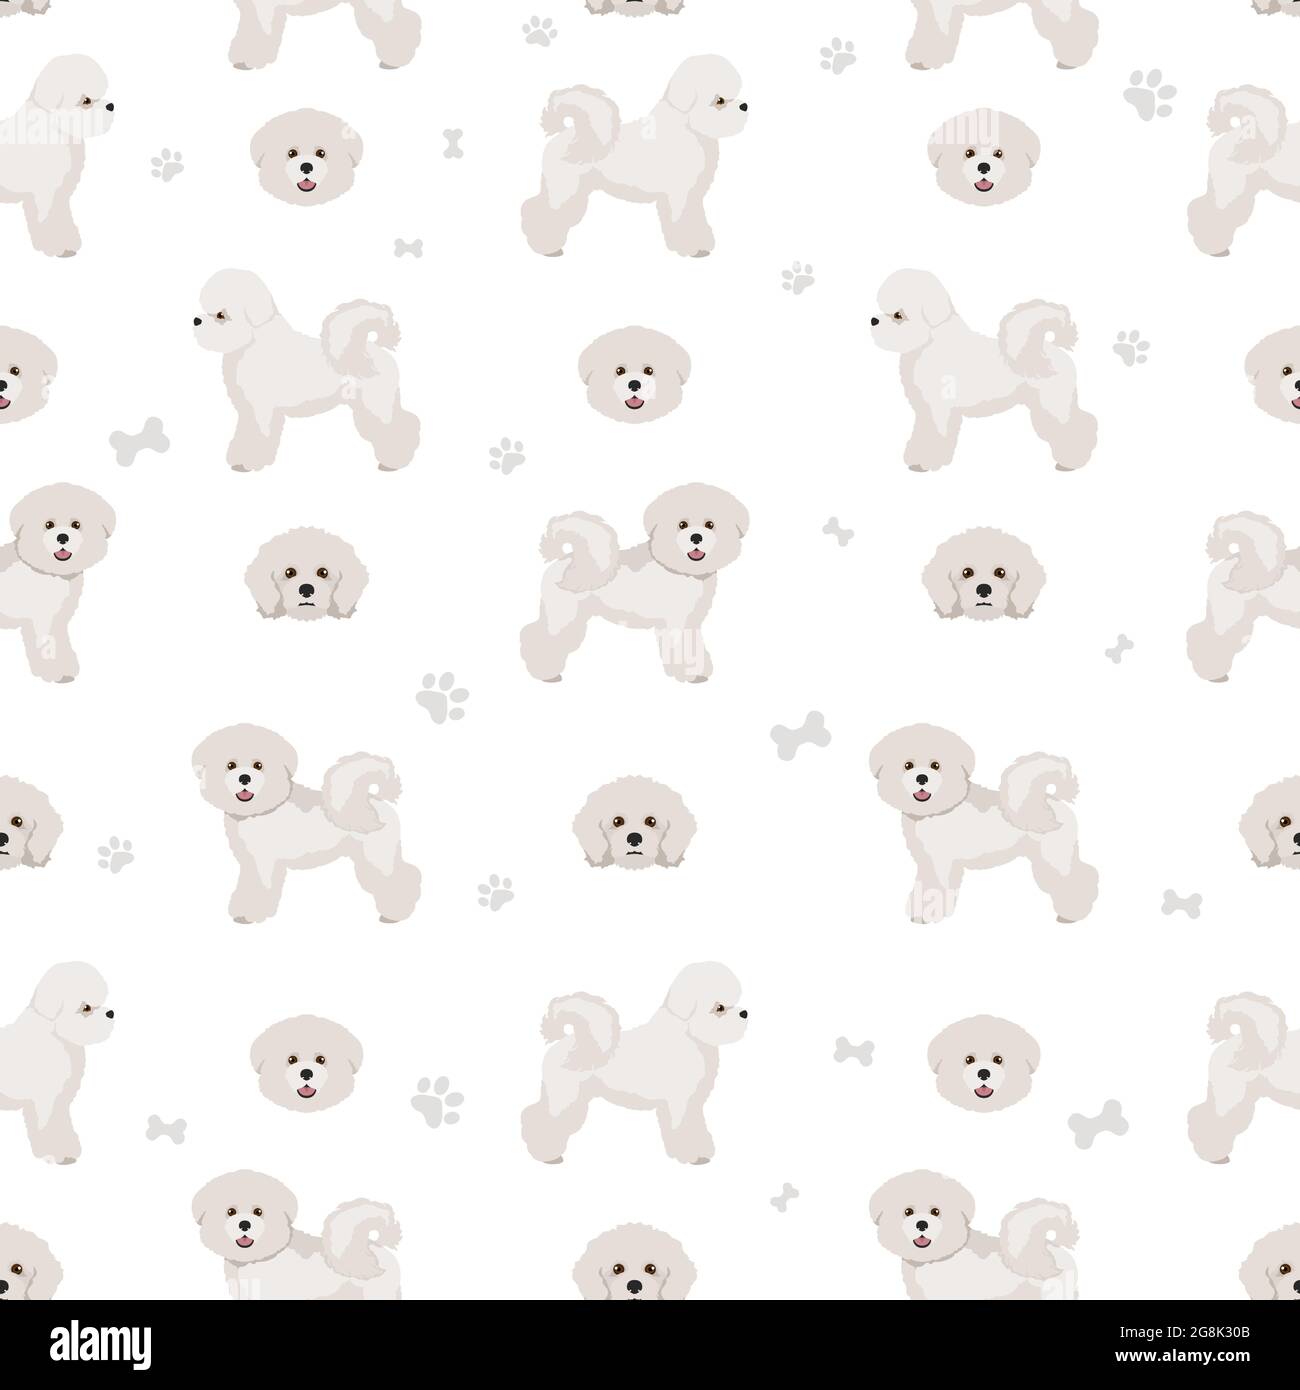 Bichon frise seamless pattern. Different coat colors and poses set.  Vector illustration Stock Vector